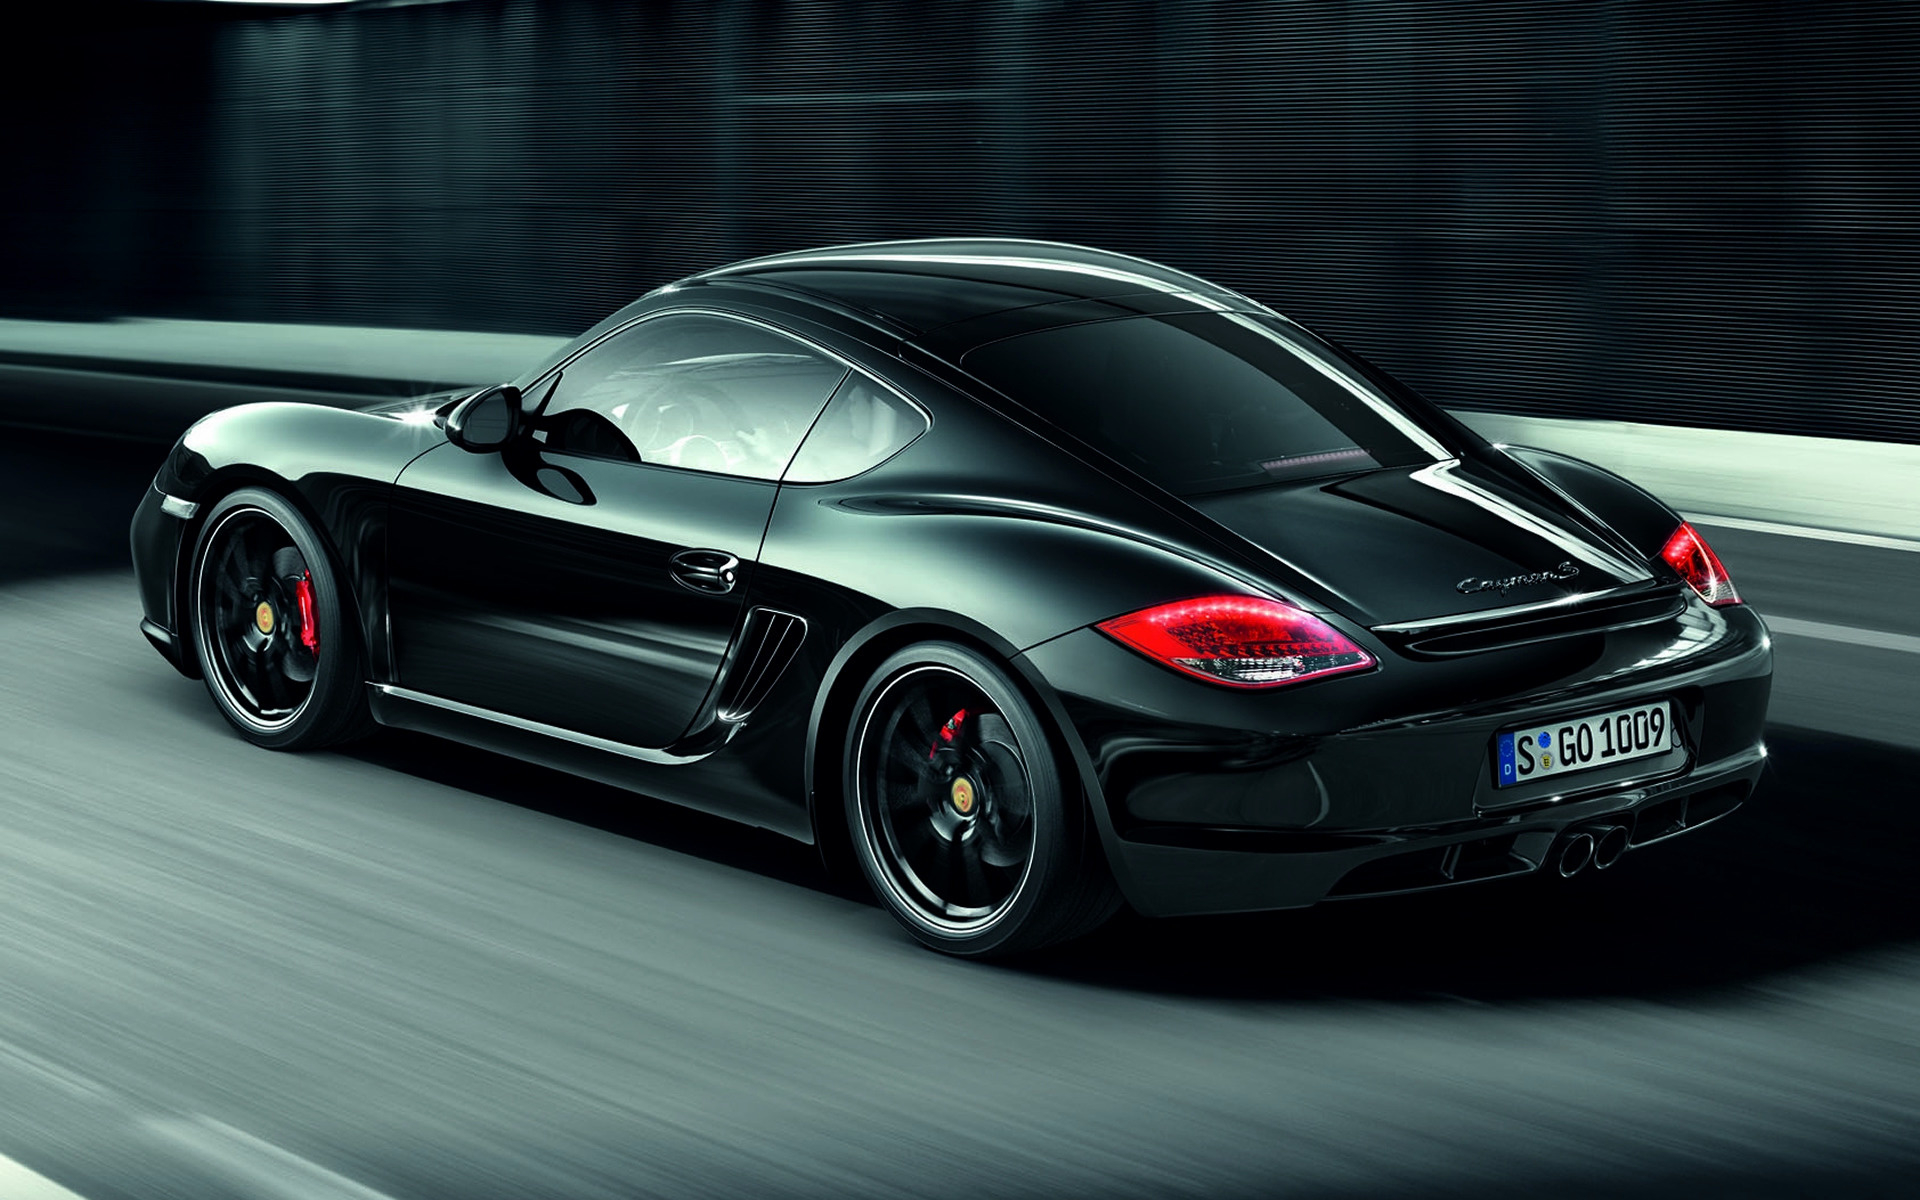 1920x1200 2011 Porsche Cayman S Black Edition Wallpapers and HD Images | Car Pixel